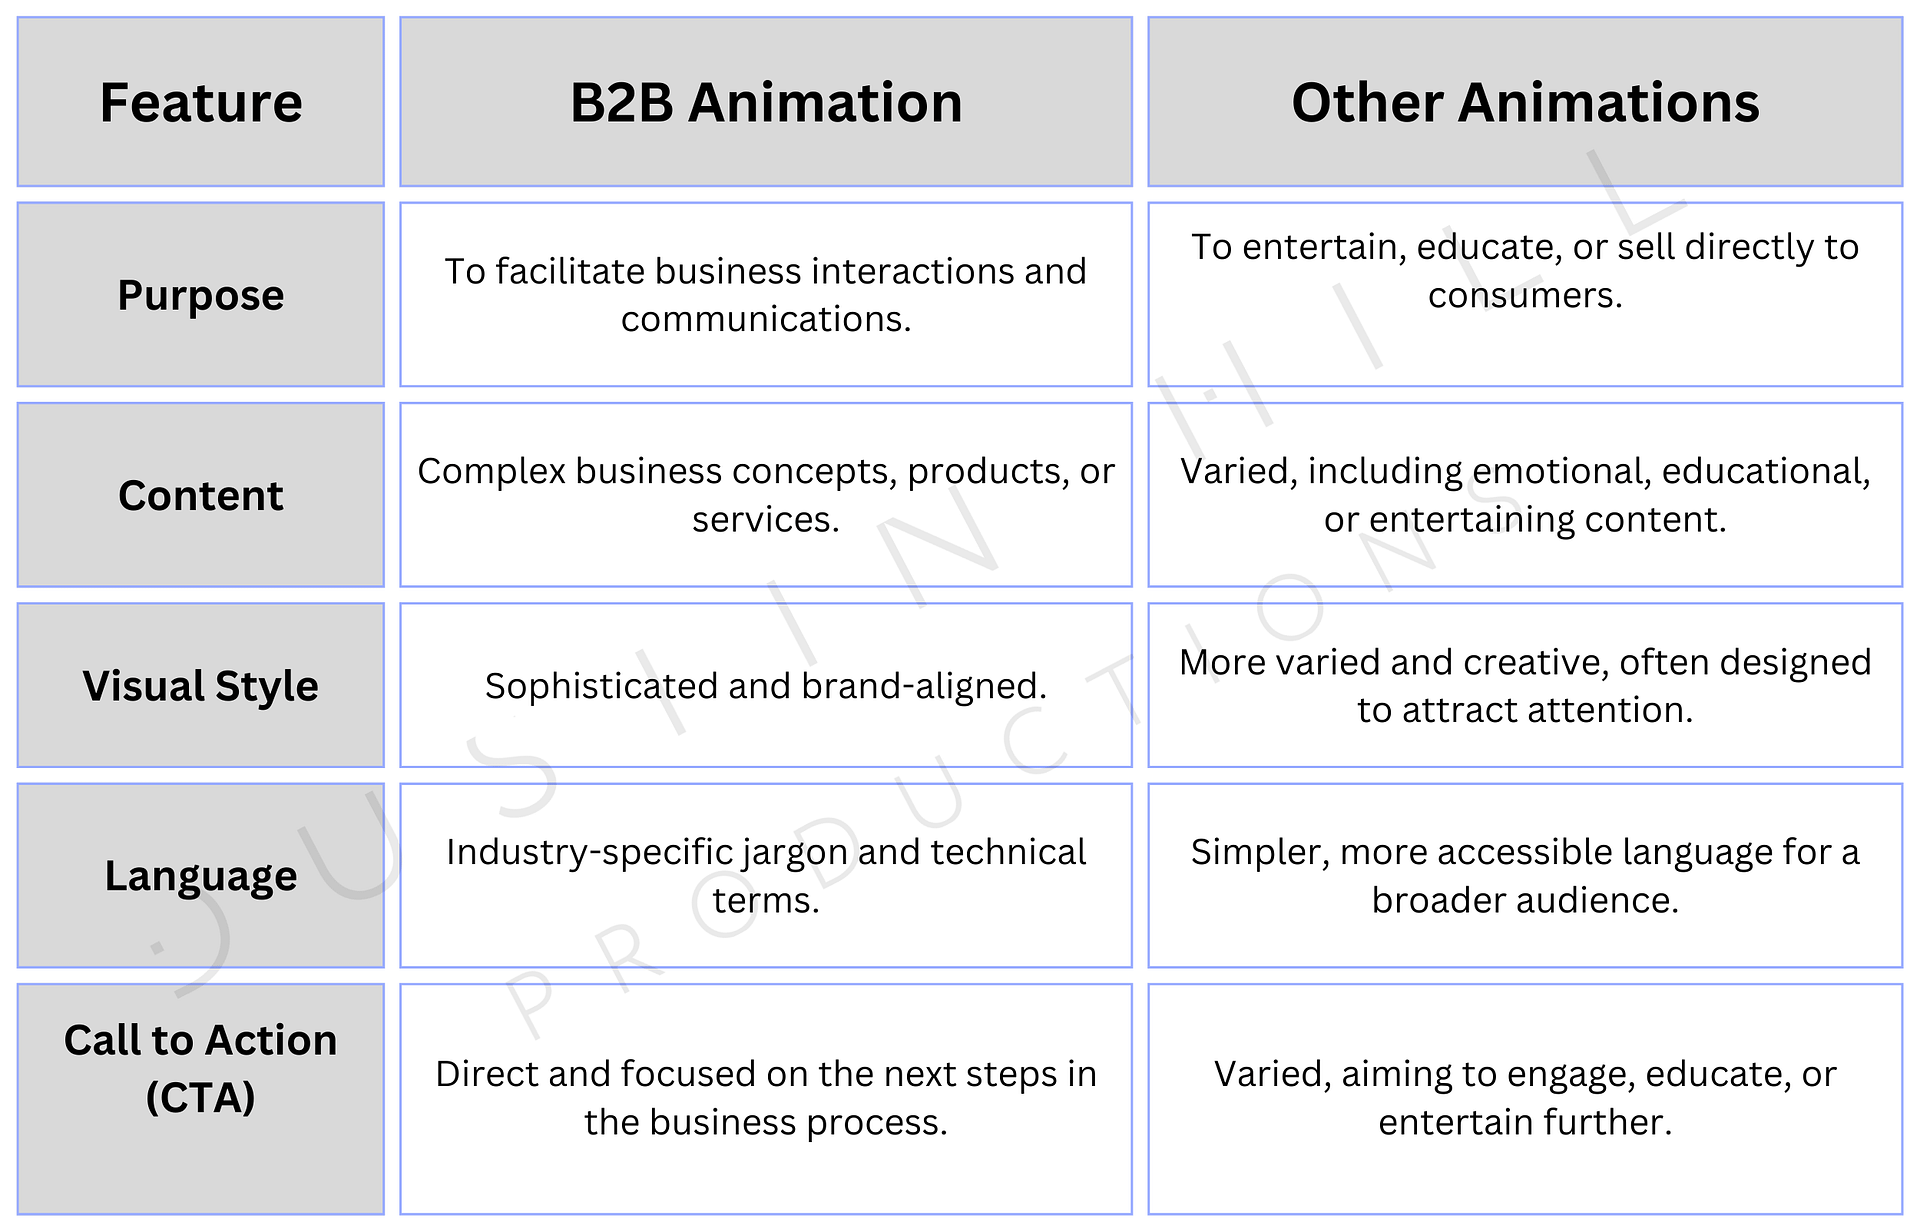 B2B Animation vs. Other Animations: A Clear View